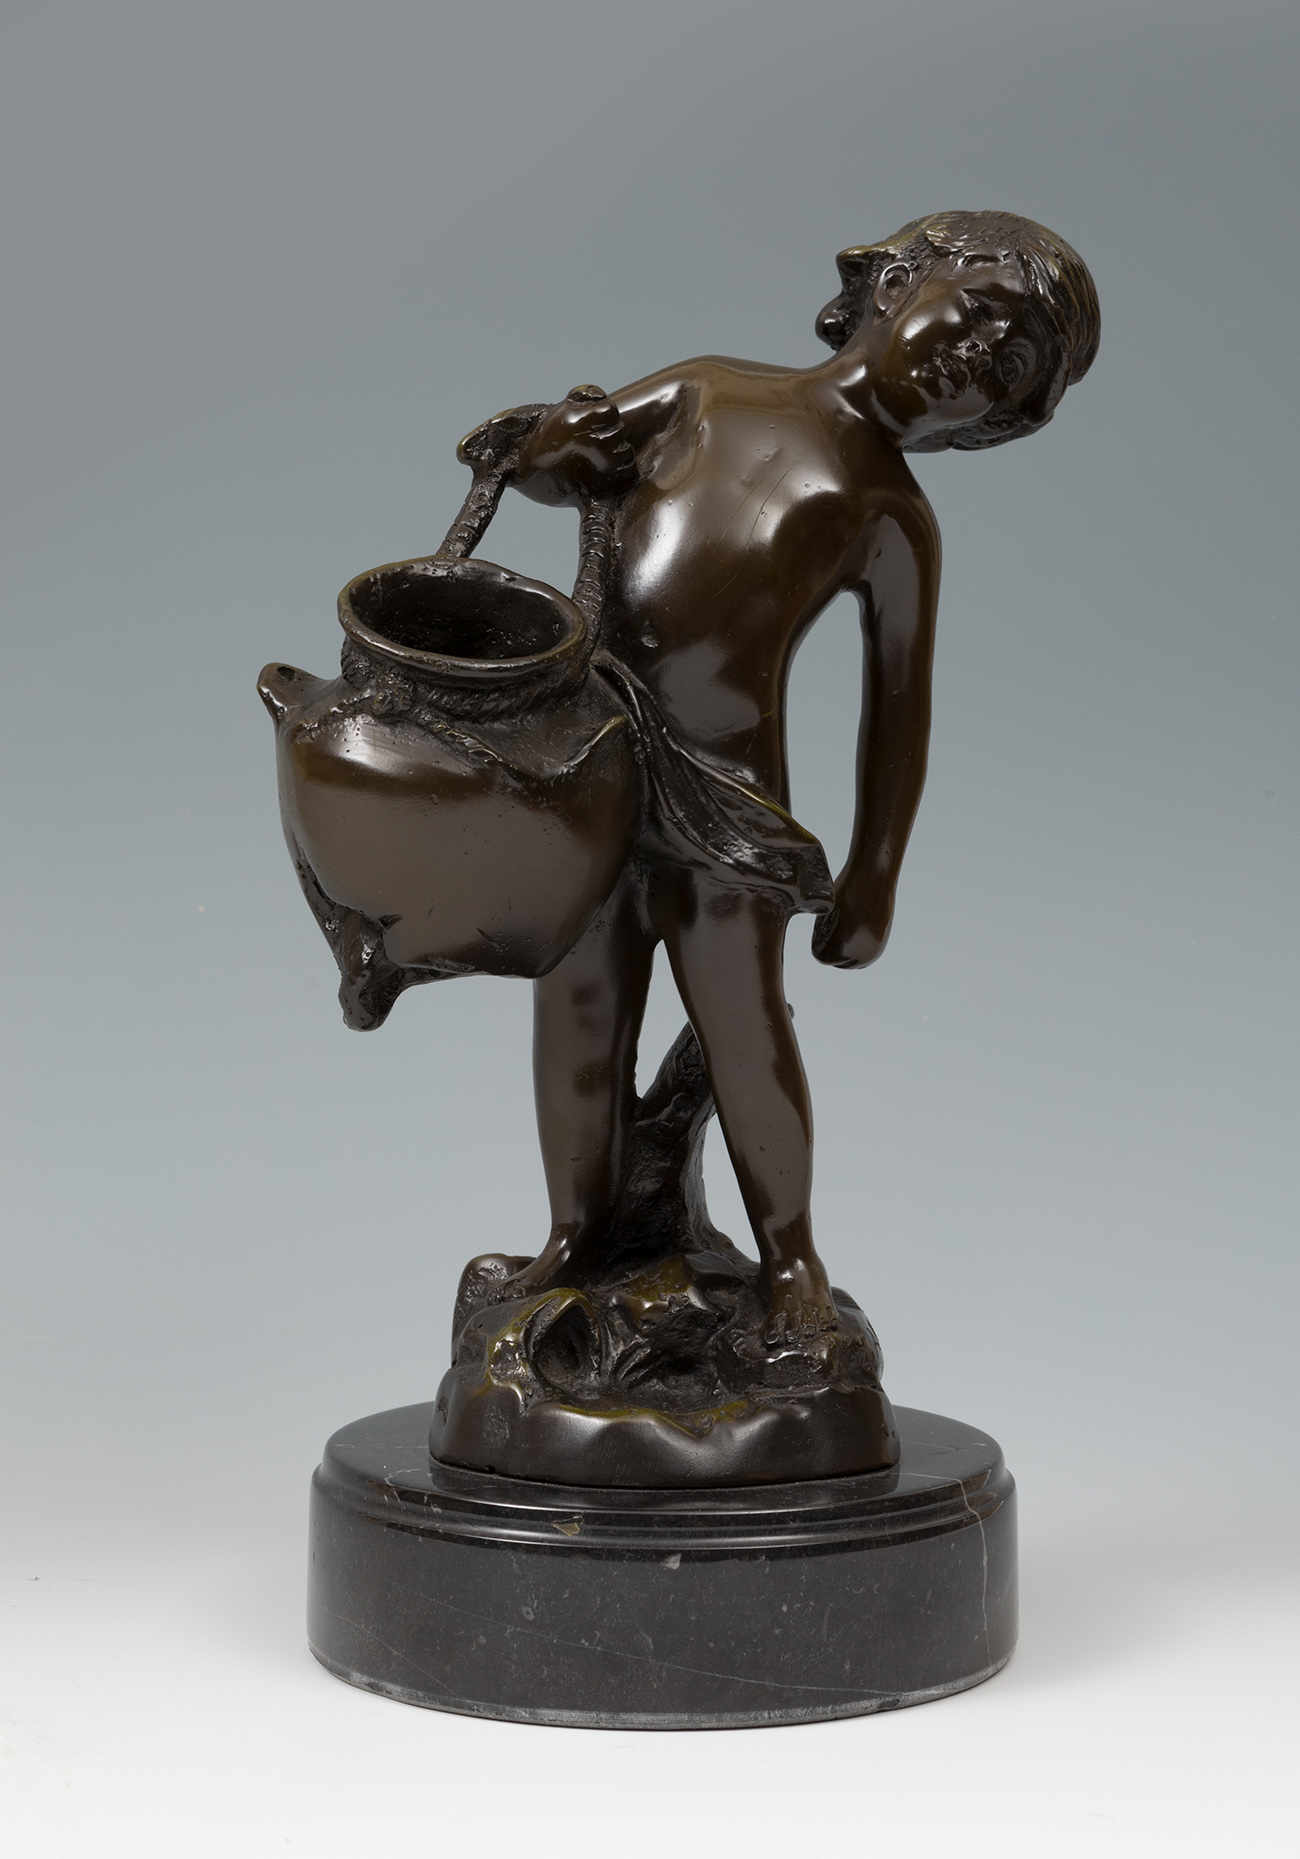 AUGUSTE MOREAU (France, 1834 - 1917)."Boy with a Pitcher".Bronze.Signed.Size: 24 cm (height); 4